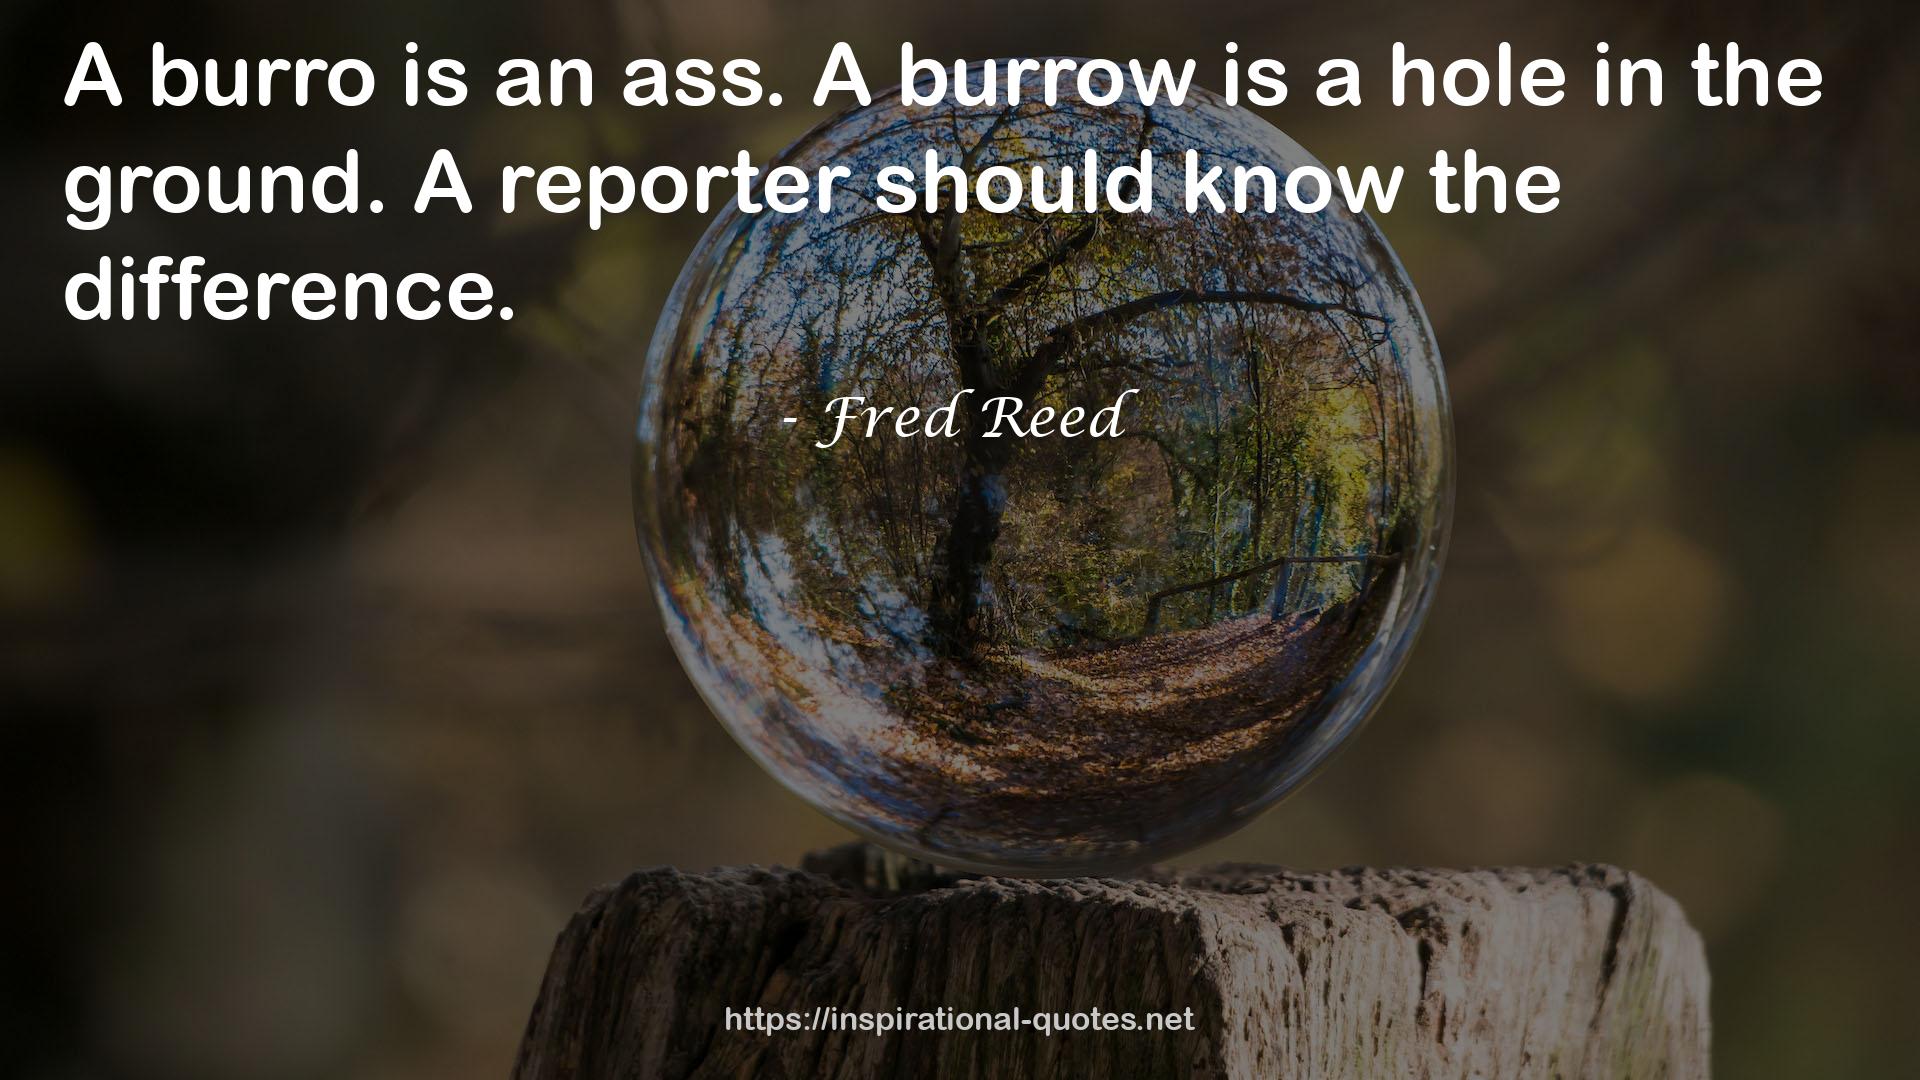 Fred Reed QUOTES